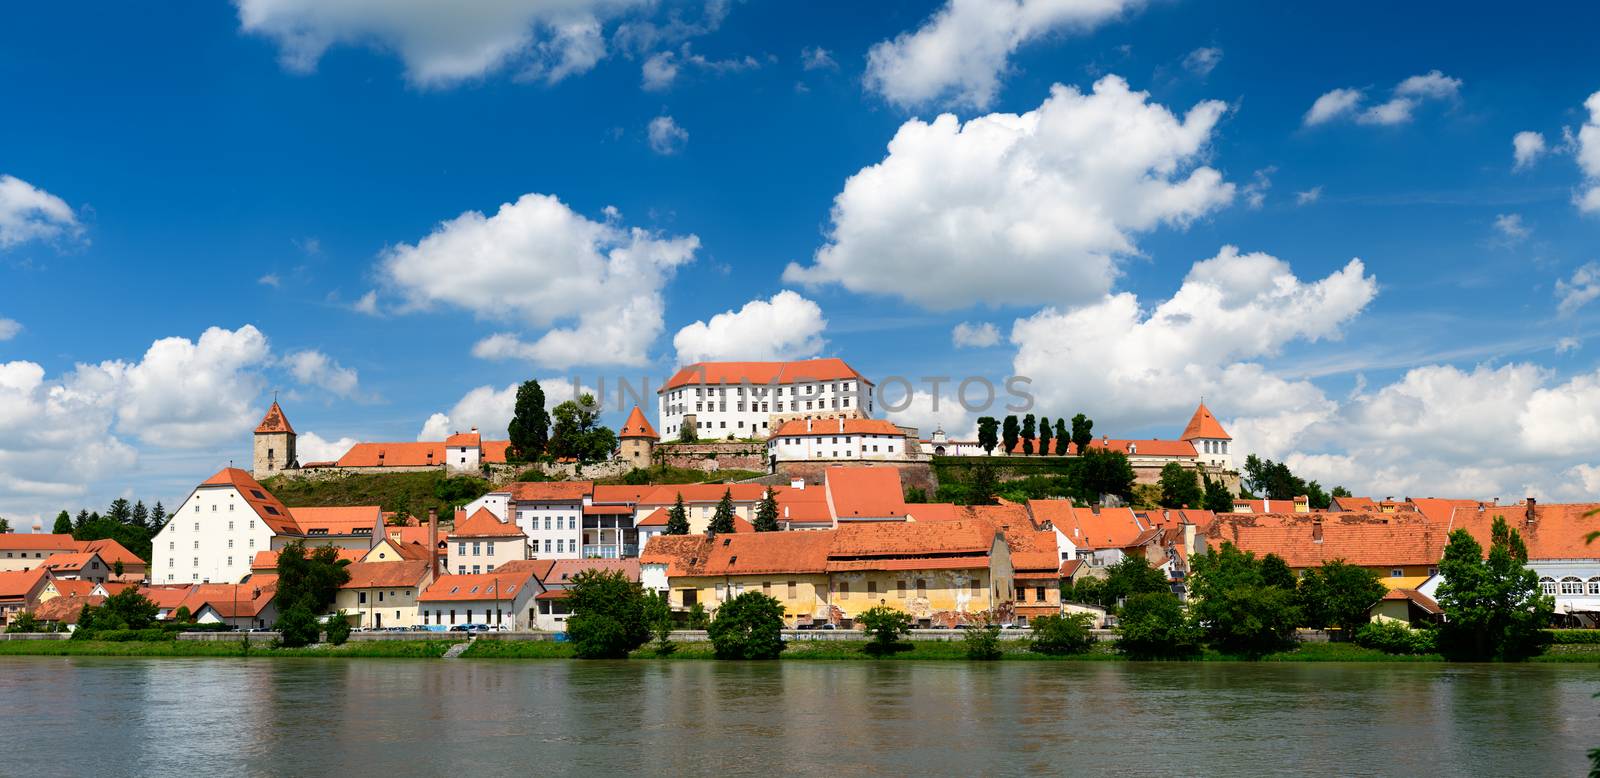 Ptuj, Slovenia, panoramic shot of oldest city in Slovenia with a castle overlooking the old town from a hill, clouds time lapse by asafaric